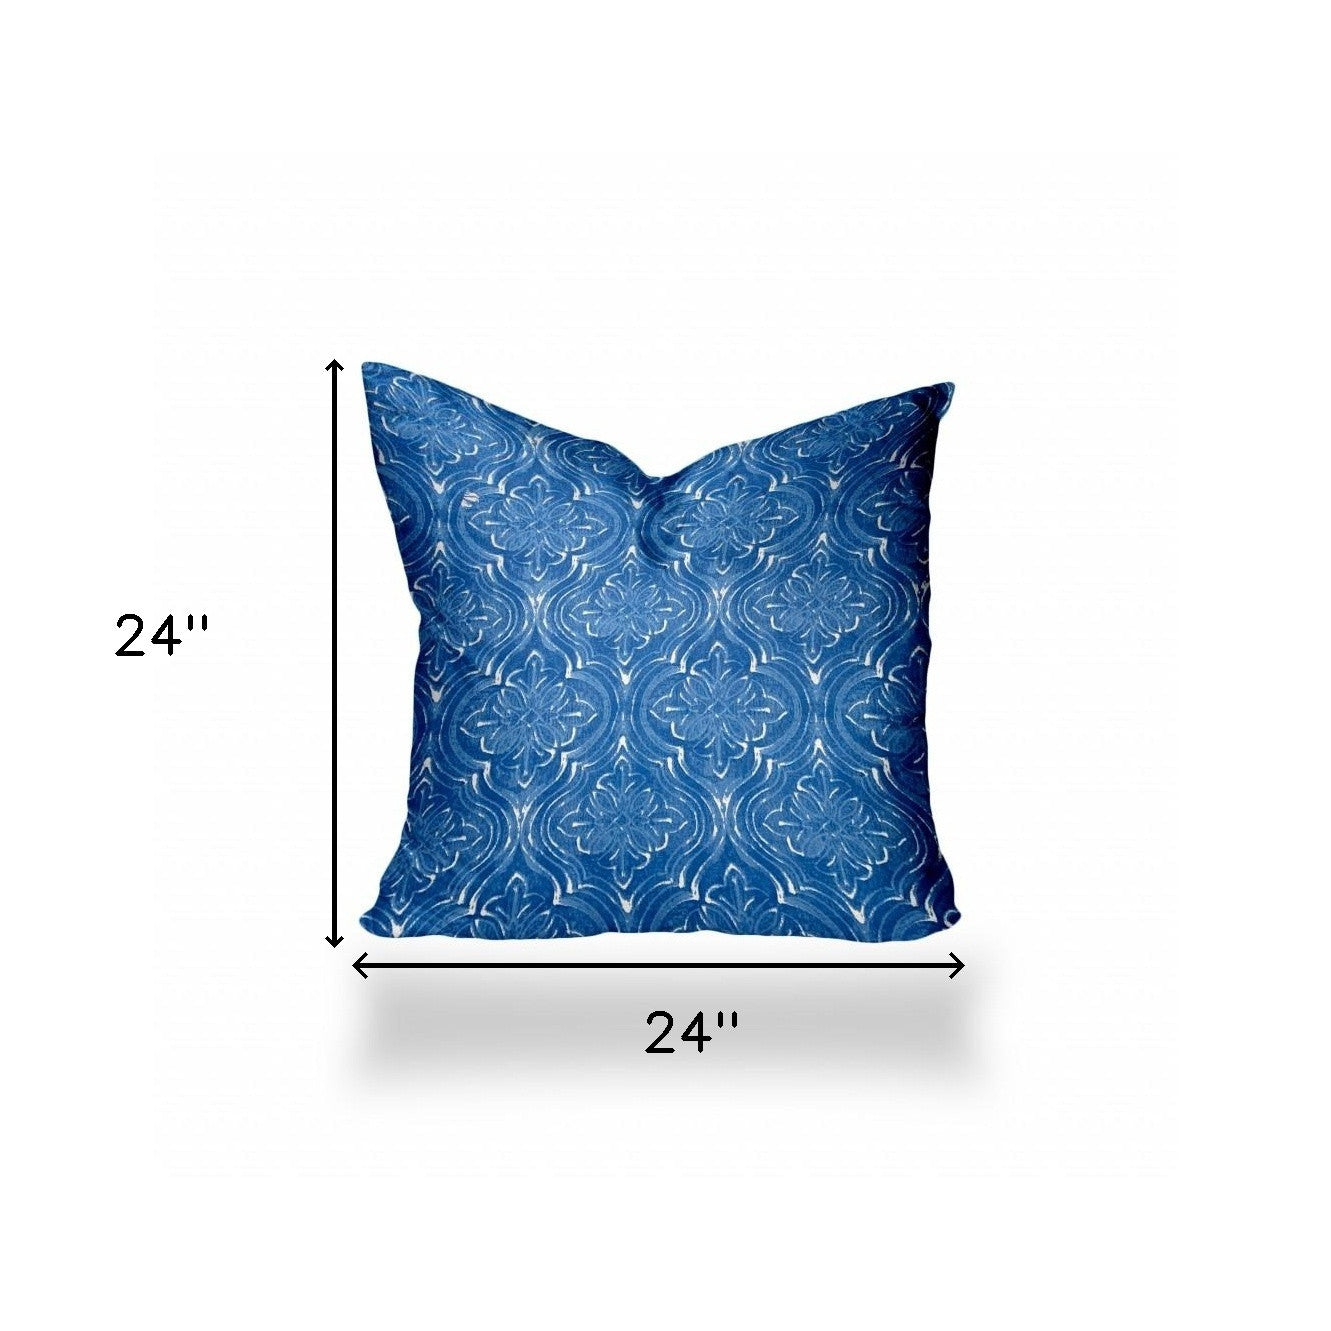 24" X 24" Blue And White Enveloped Ikat Throw Indoor Outdoor Pillow Cover